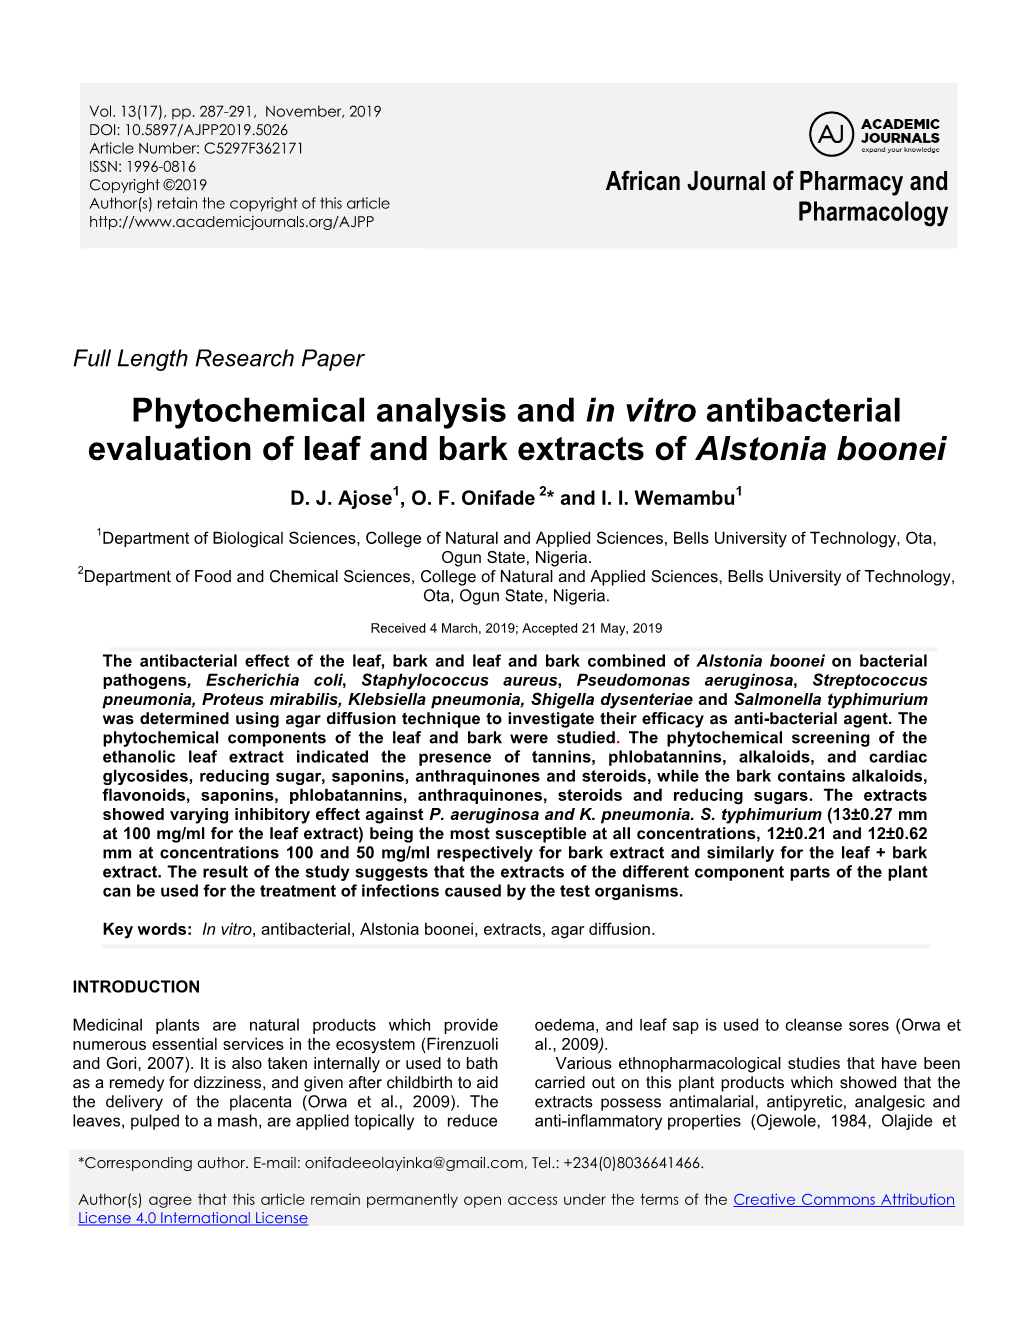 Phytochemical Analysis and in Vitro Antibacterial Evaluation of Leaf and Bark Extracts of Alstonia Boonei